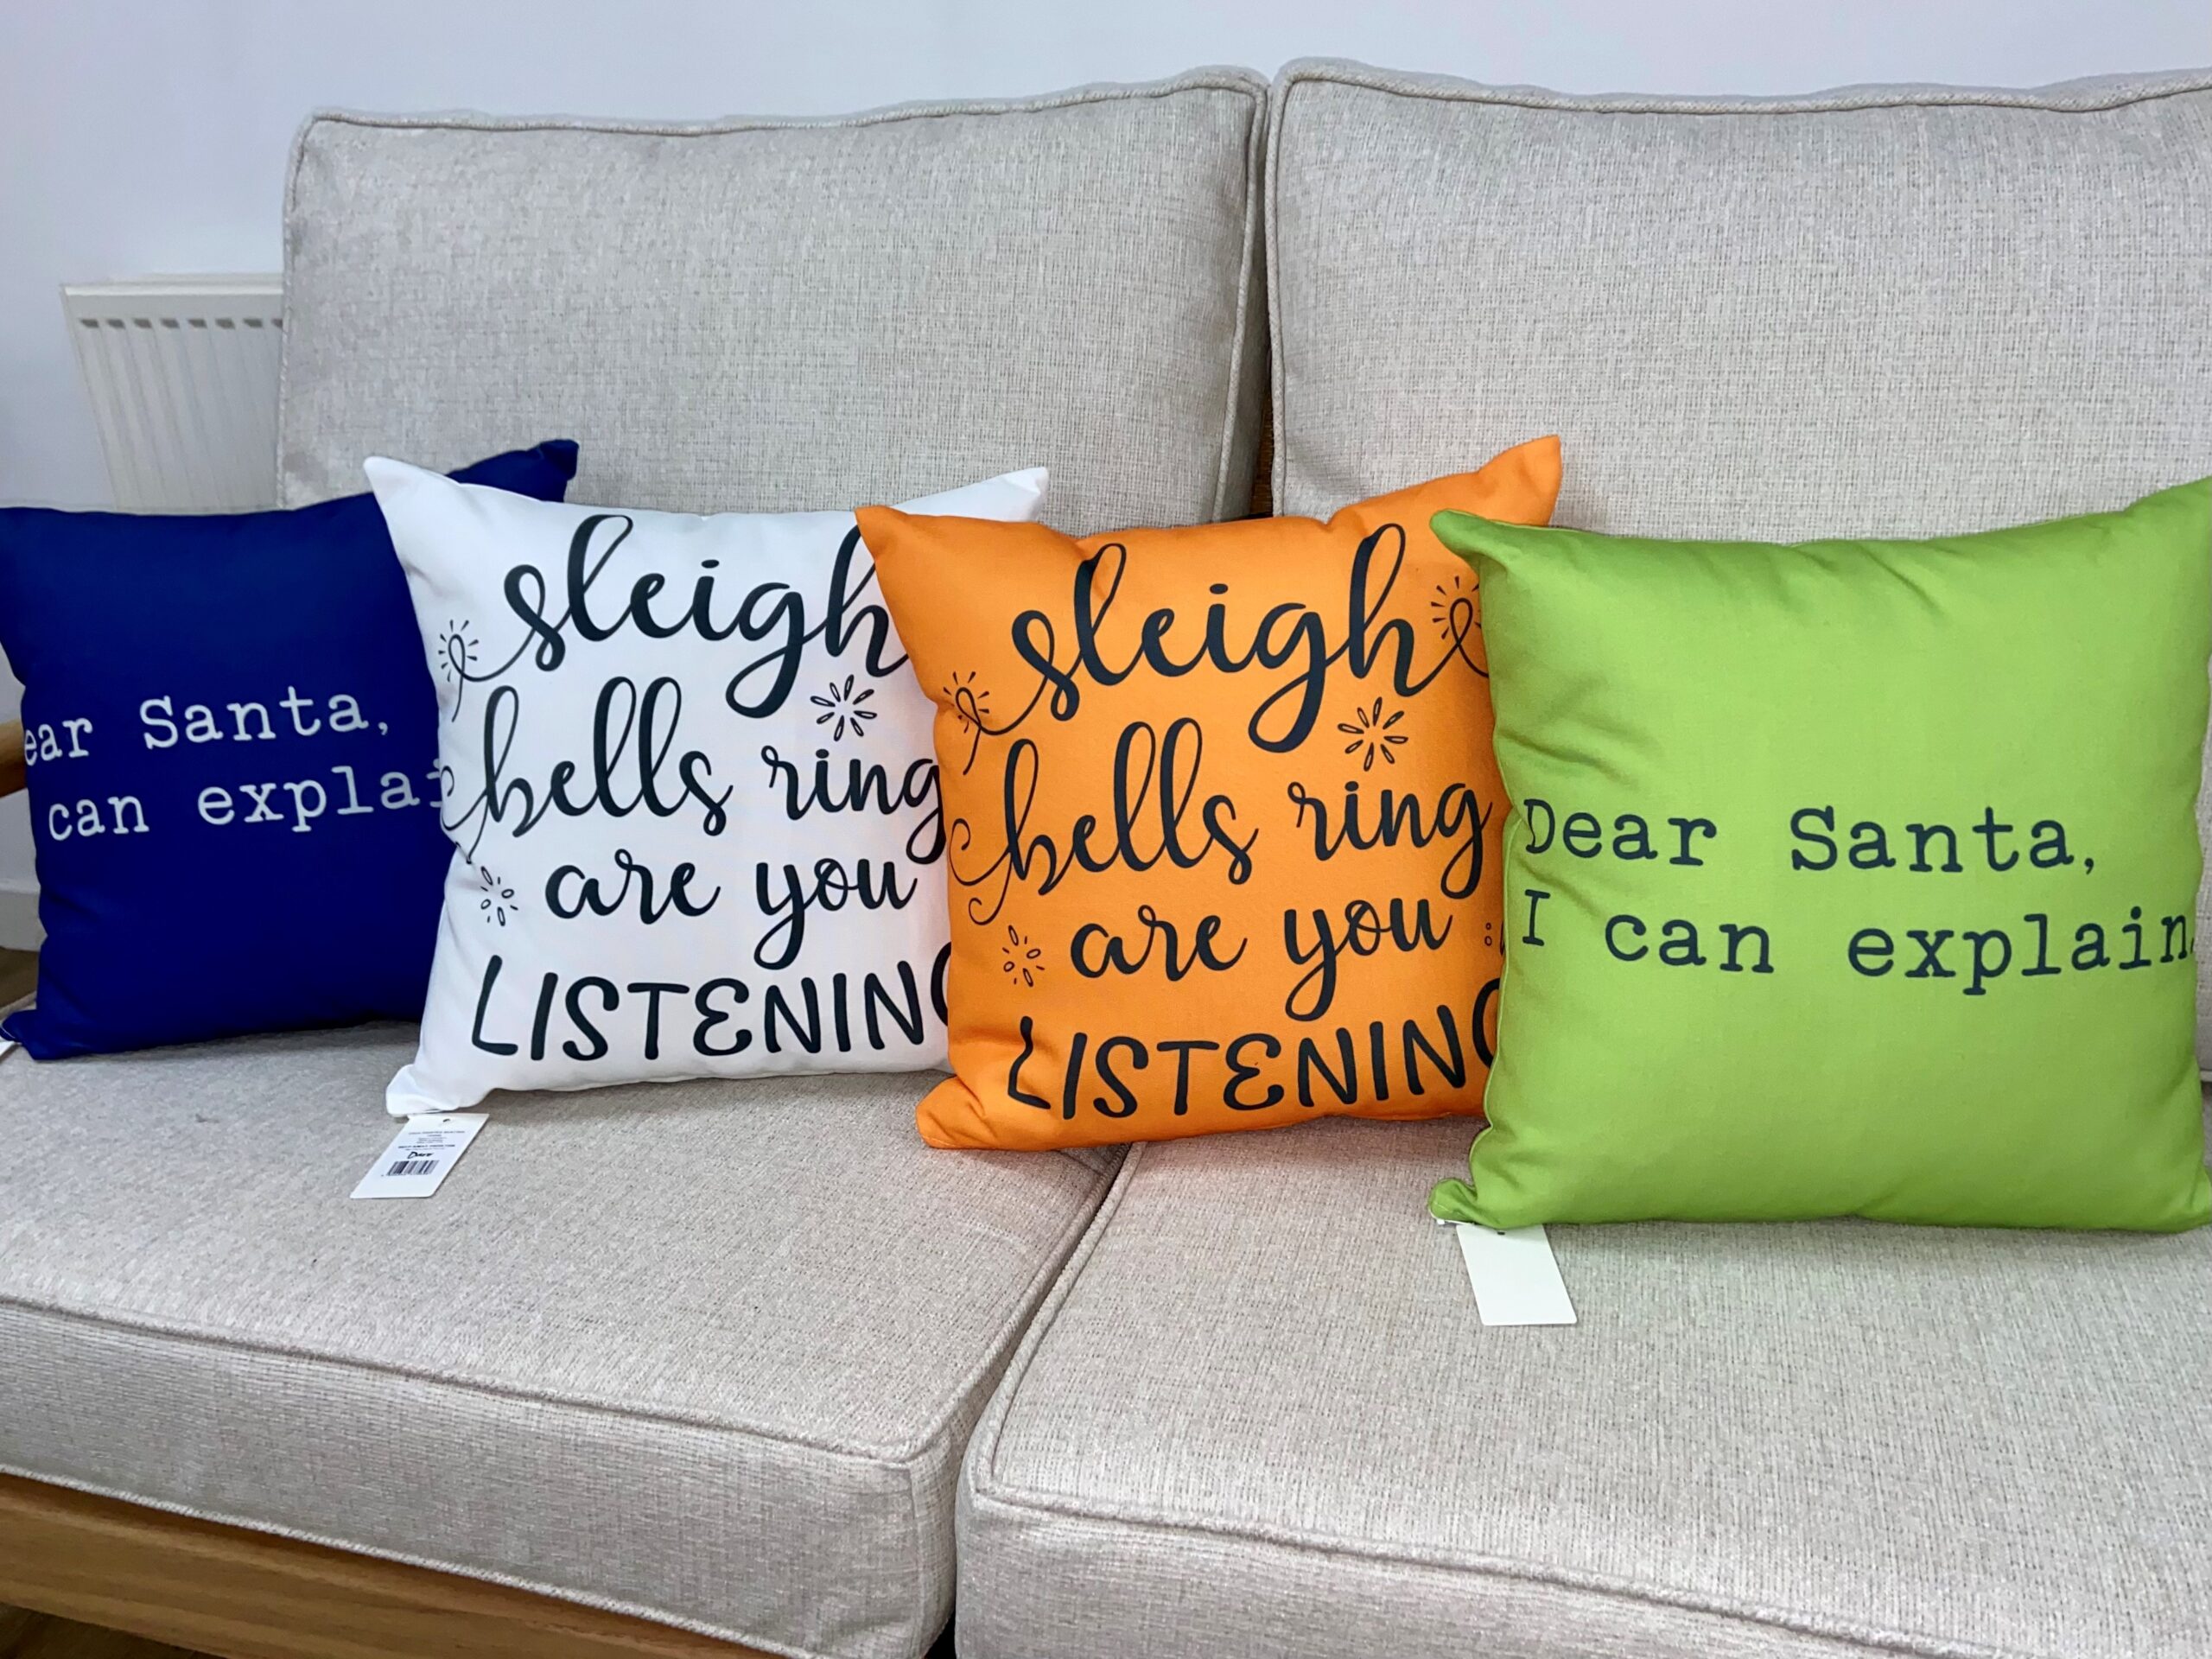 Indoor Scatter Cushion Bundle x 4 - Christmas Colour Cushions